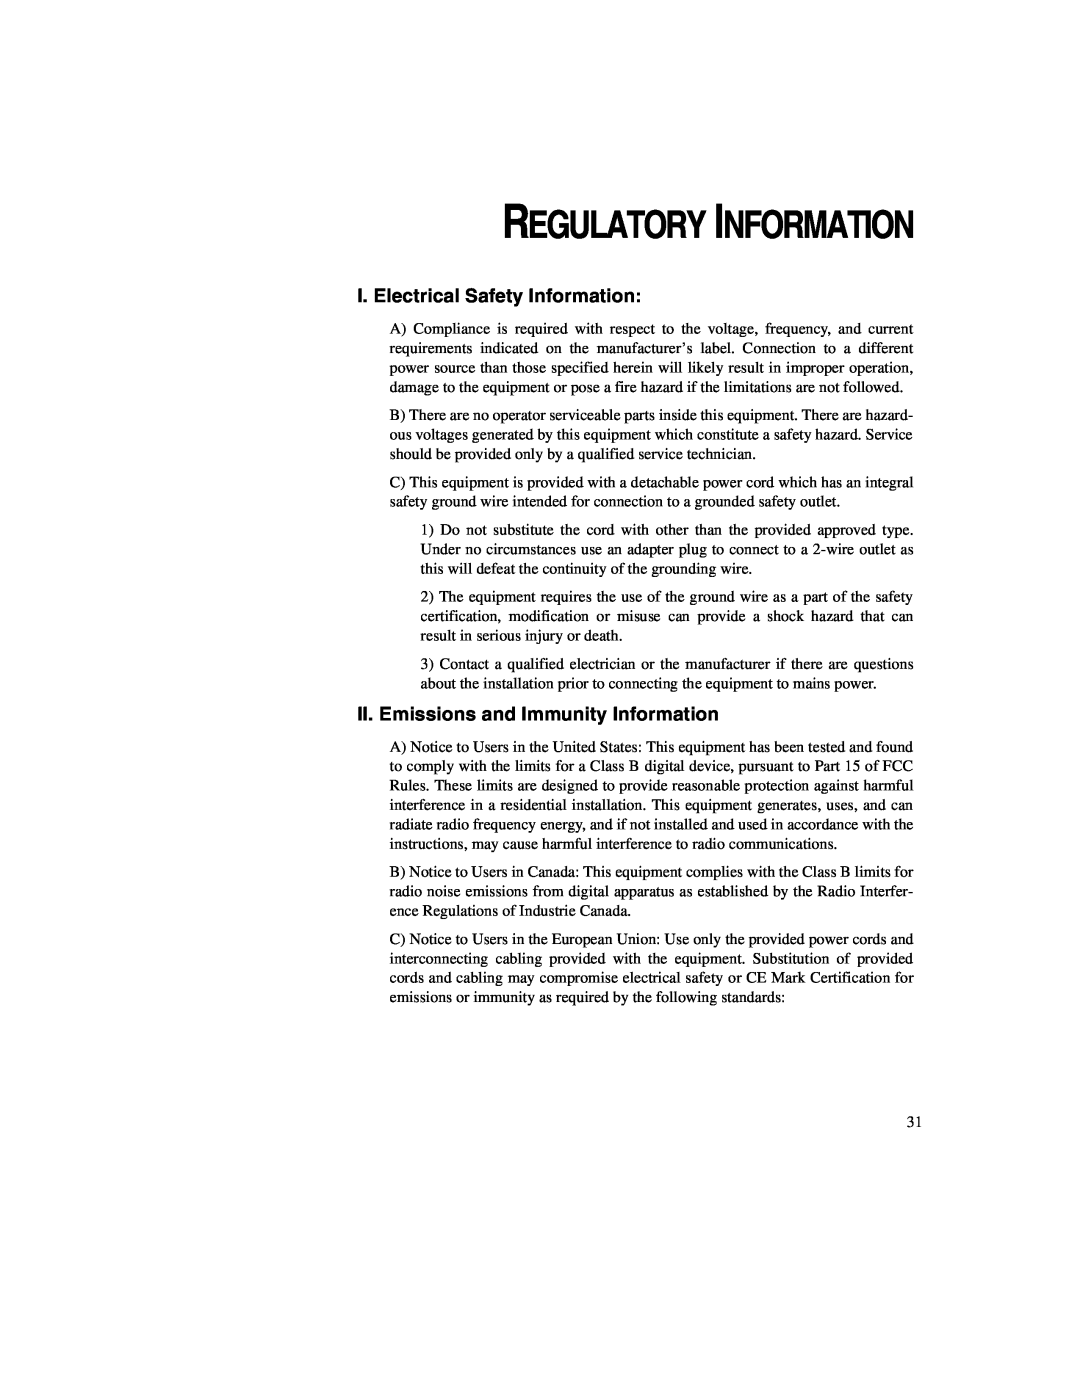 Elo TouchSystems 1247L Regulatory Information, I. Electrical Safety Information, II. Emissions and Immunity Information 